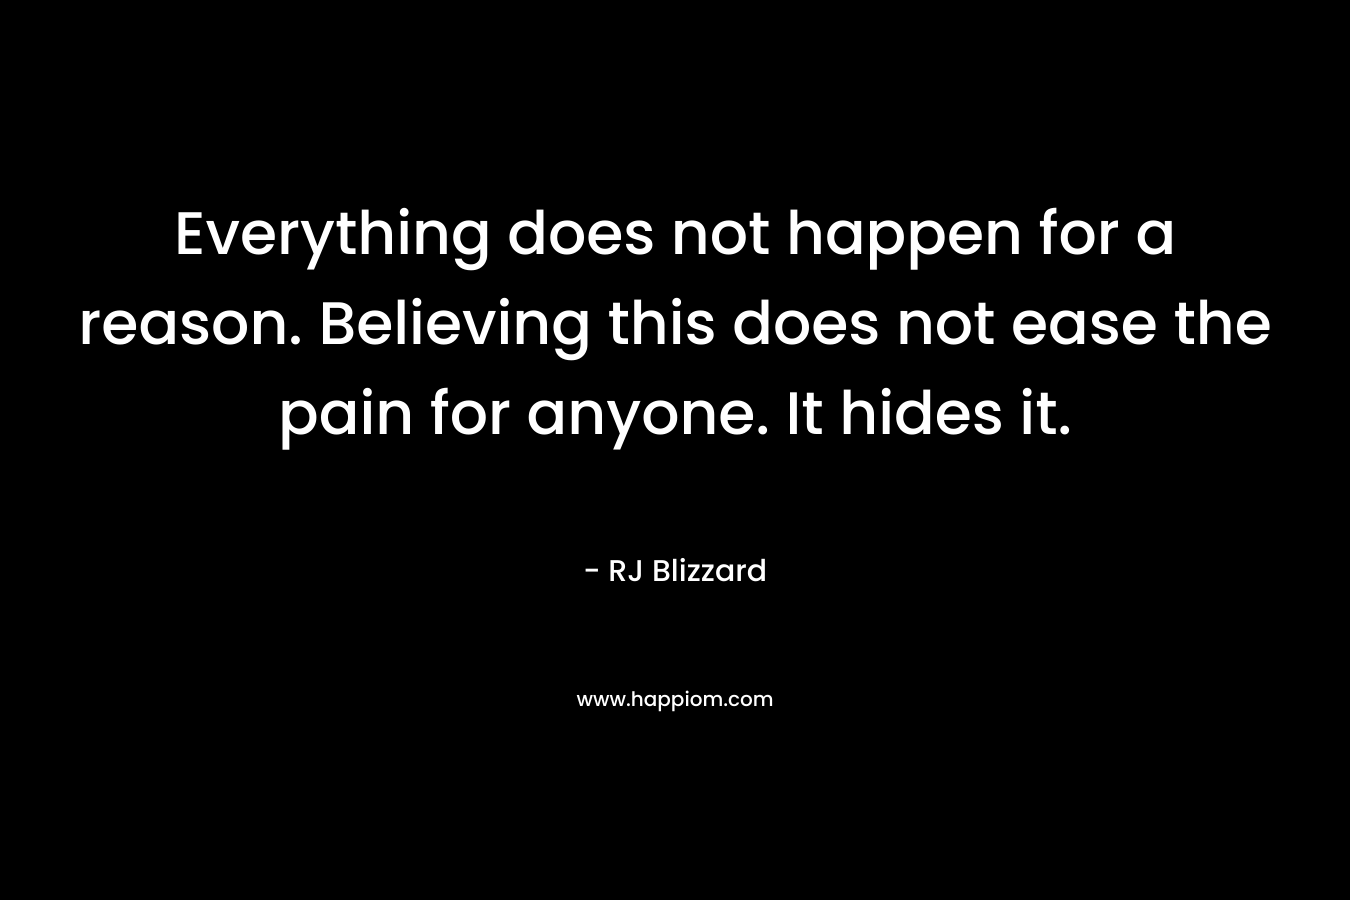 Everything does not happen for a reason. Believing this does not ease the pain for anyone. It hides it.